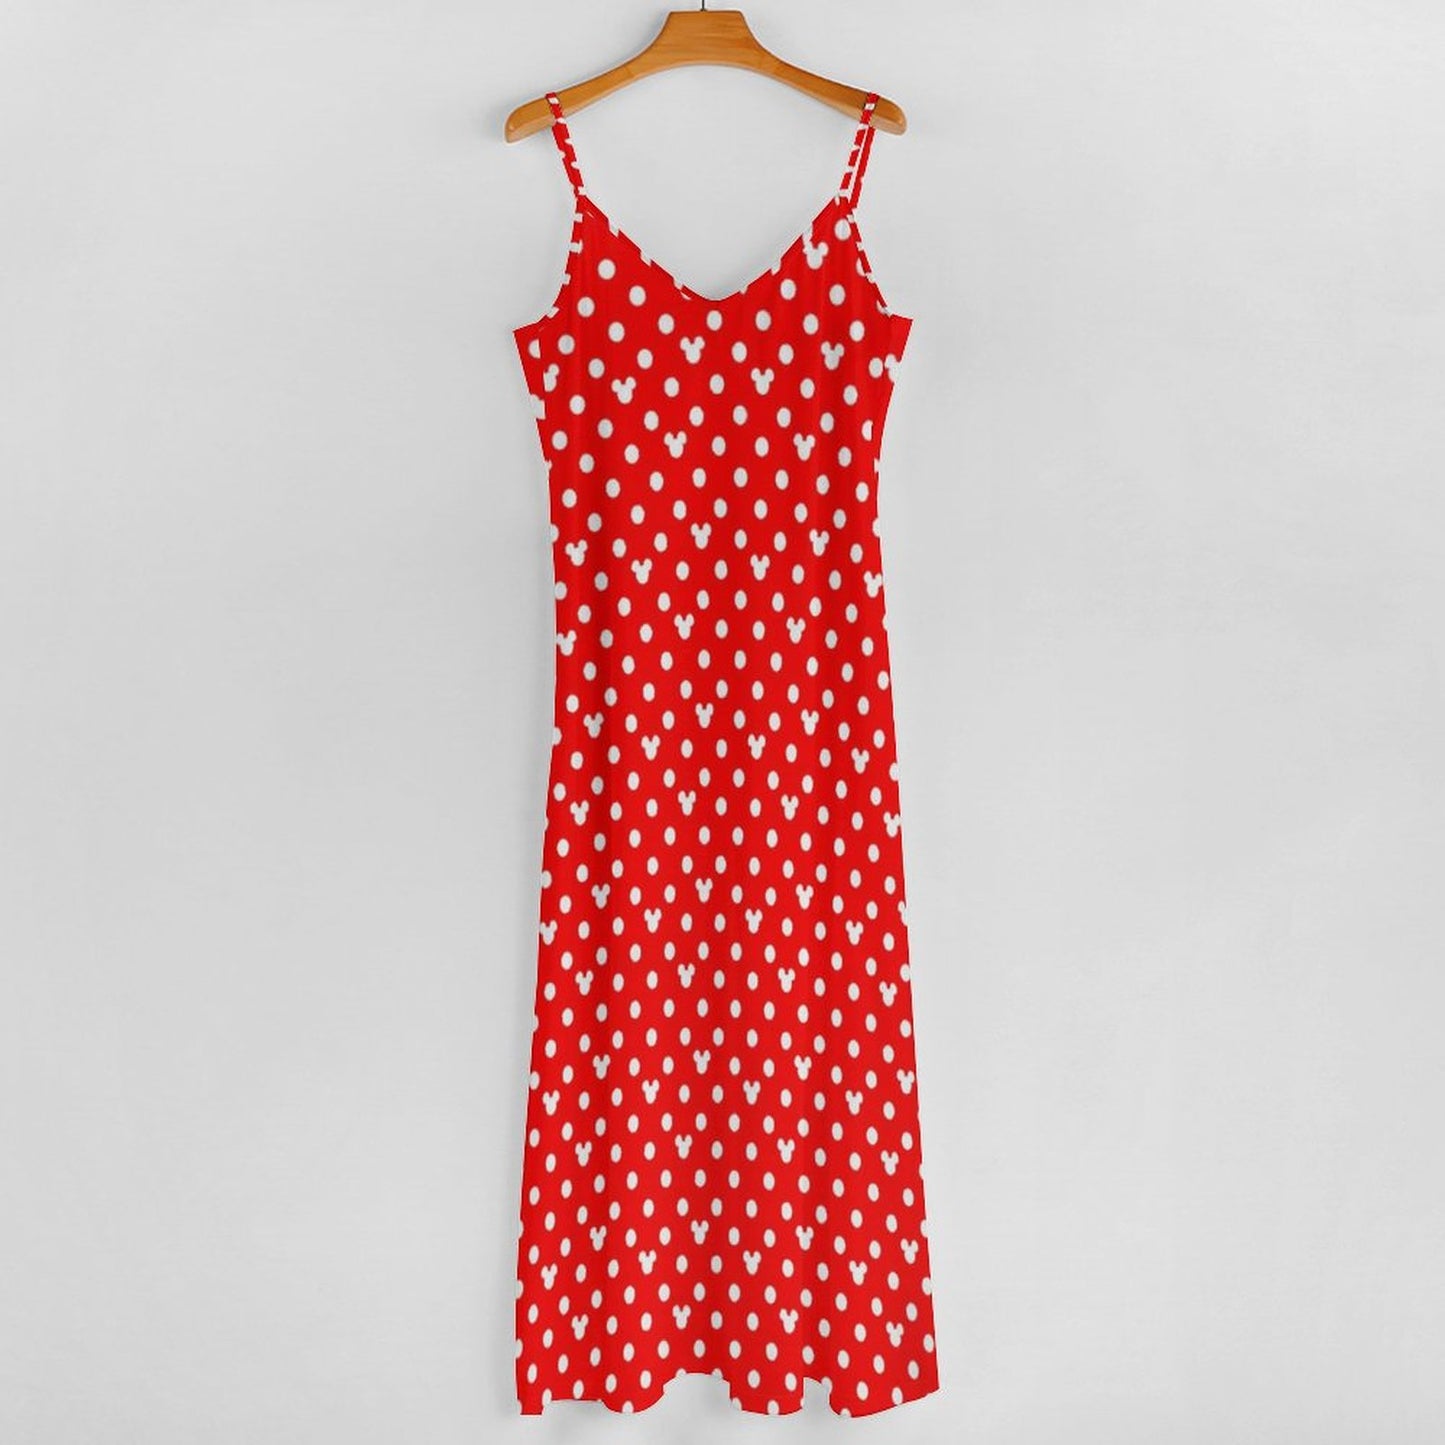 Red With White Mickey Polka Dots Women's Summer Slip Long Dress